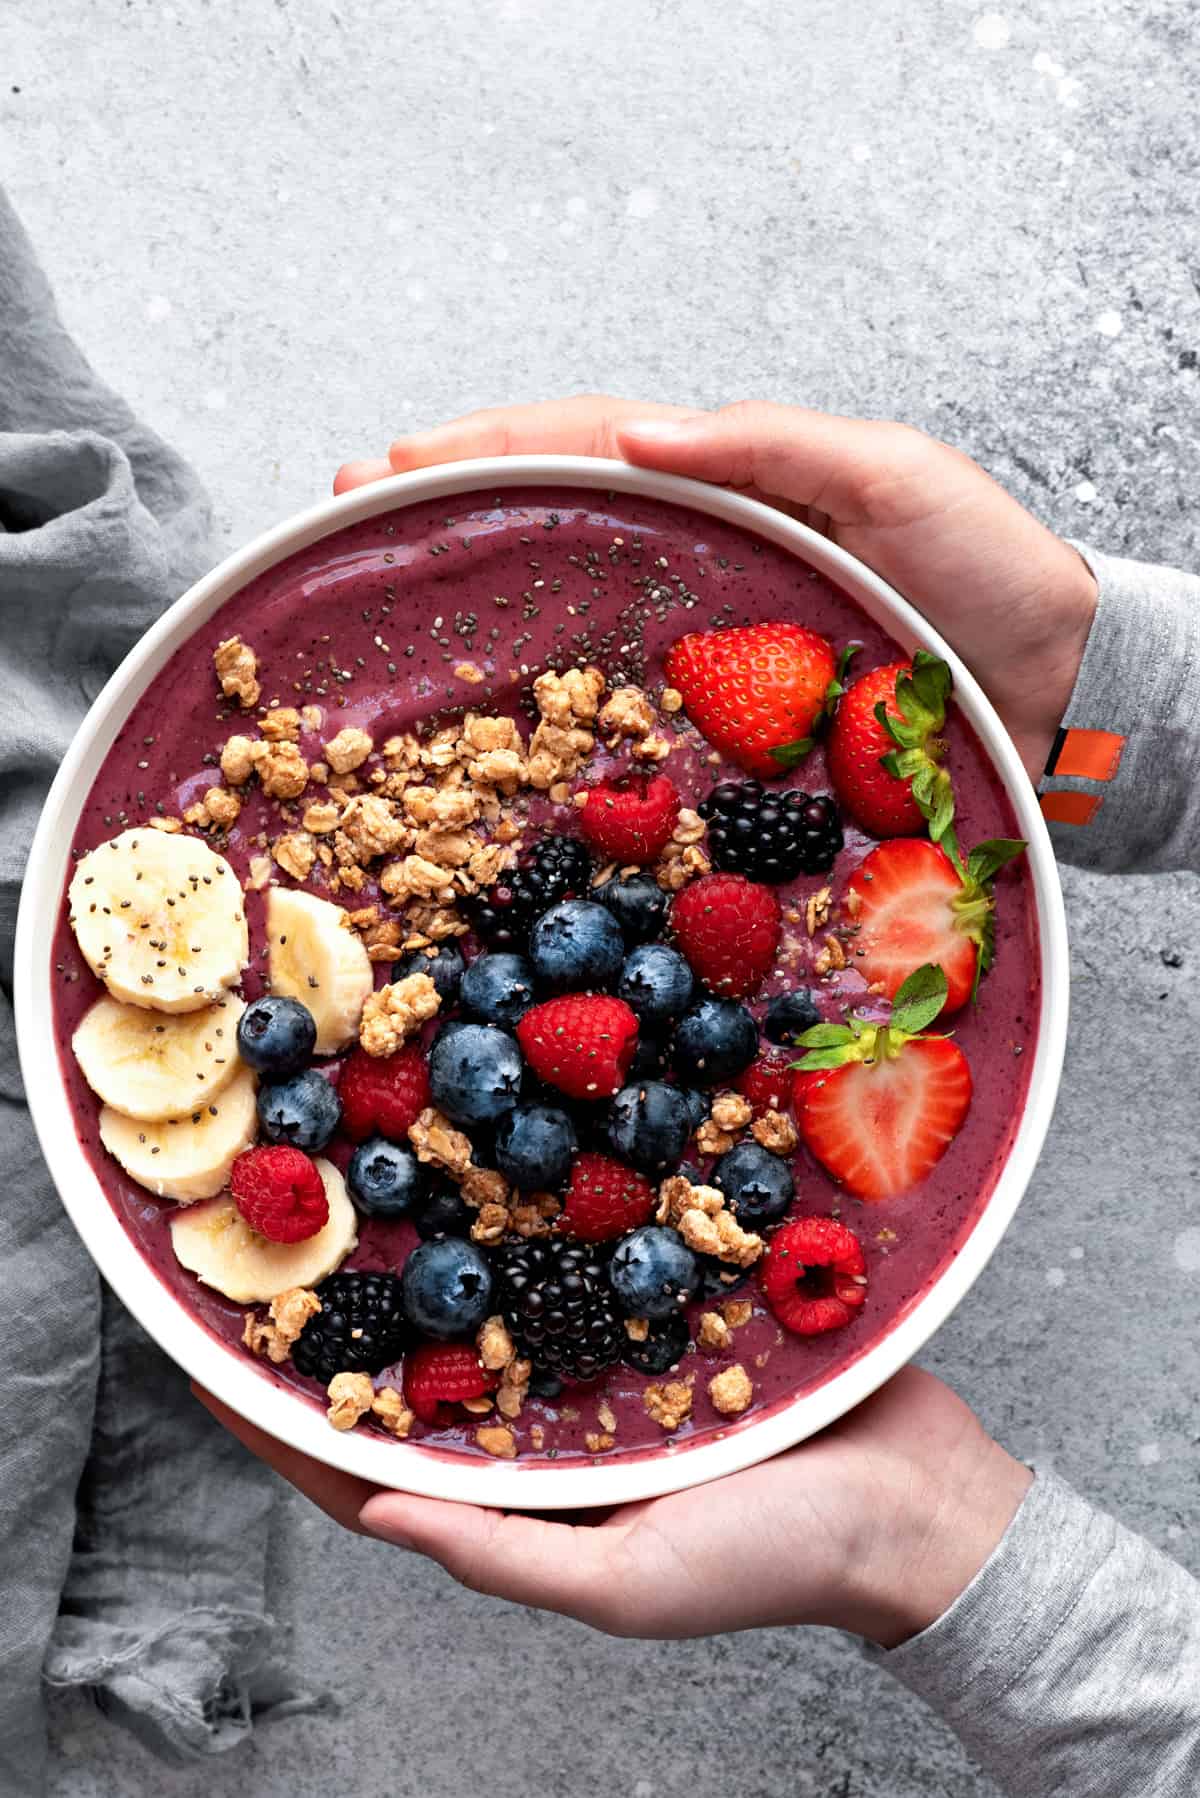 Two hands holding a large white bowl with blended berry Acai smoothie, topped with slices of bananas, granola, fresh blueberries, strawberries, raspberries, and seeds.